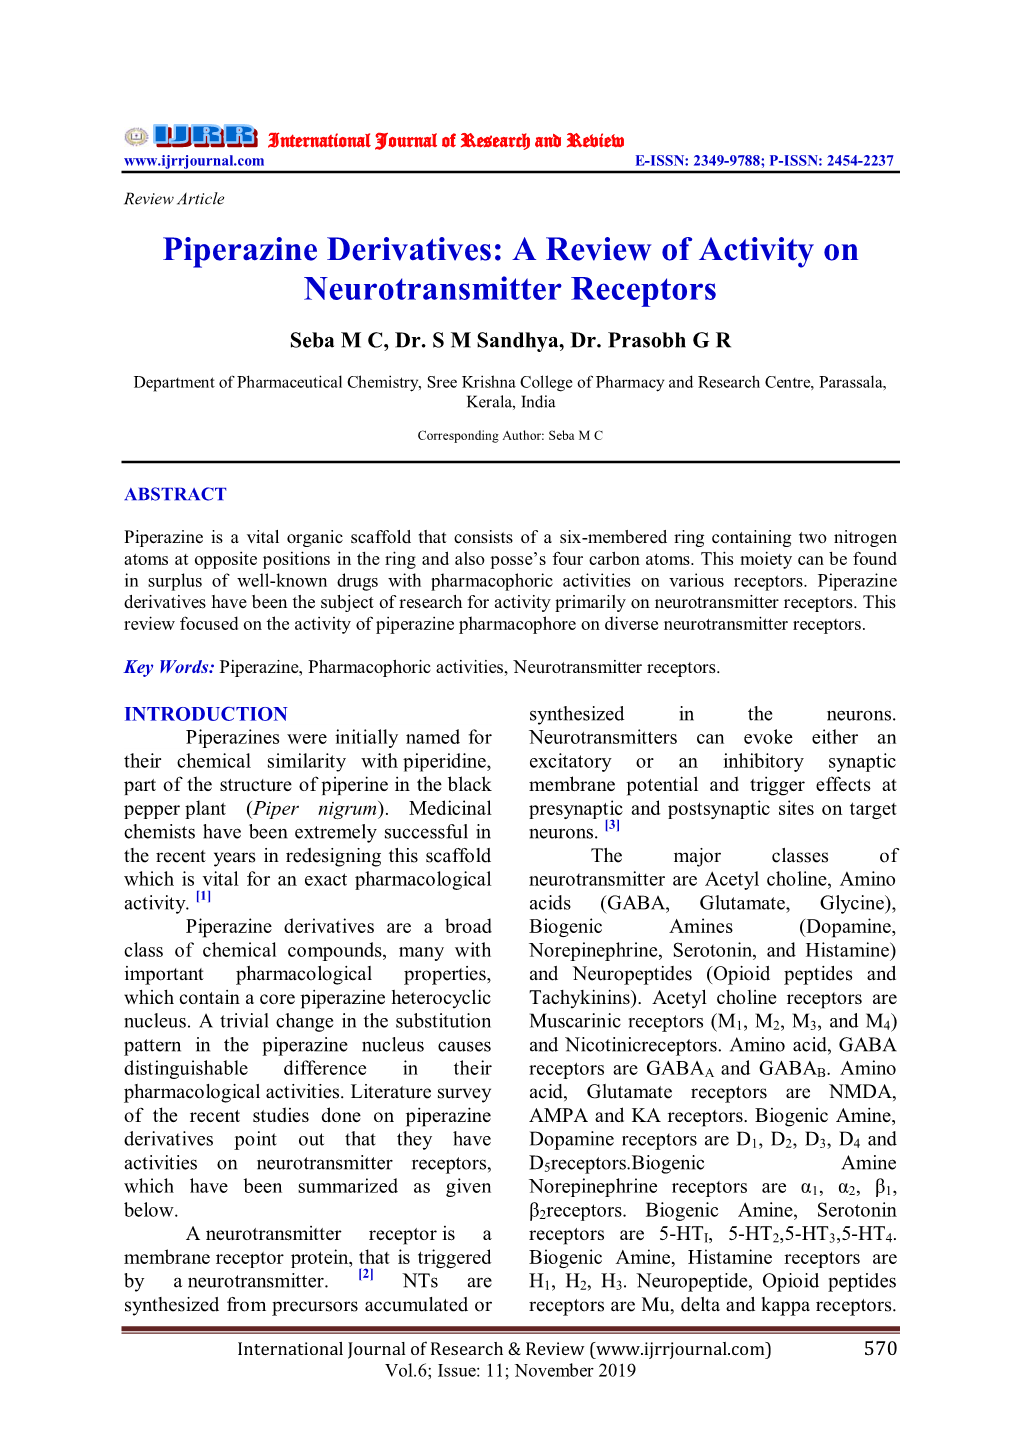 Piperazine Derivatives: a Review of Activity on Neurotransmitter Receptors